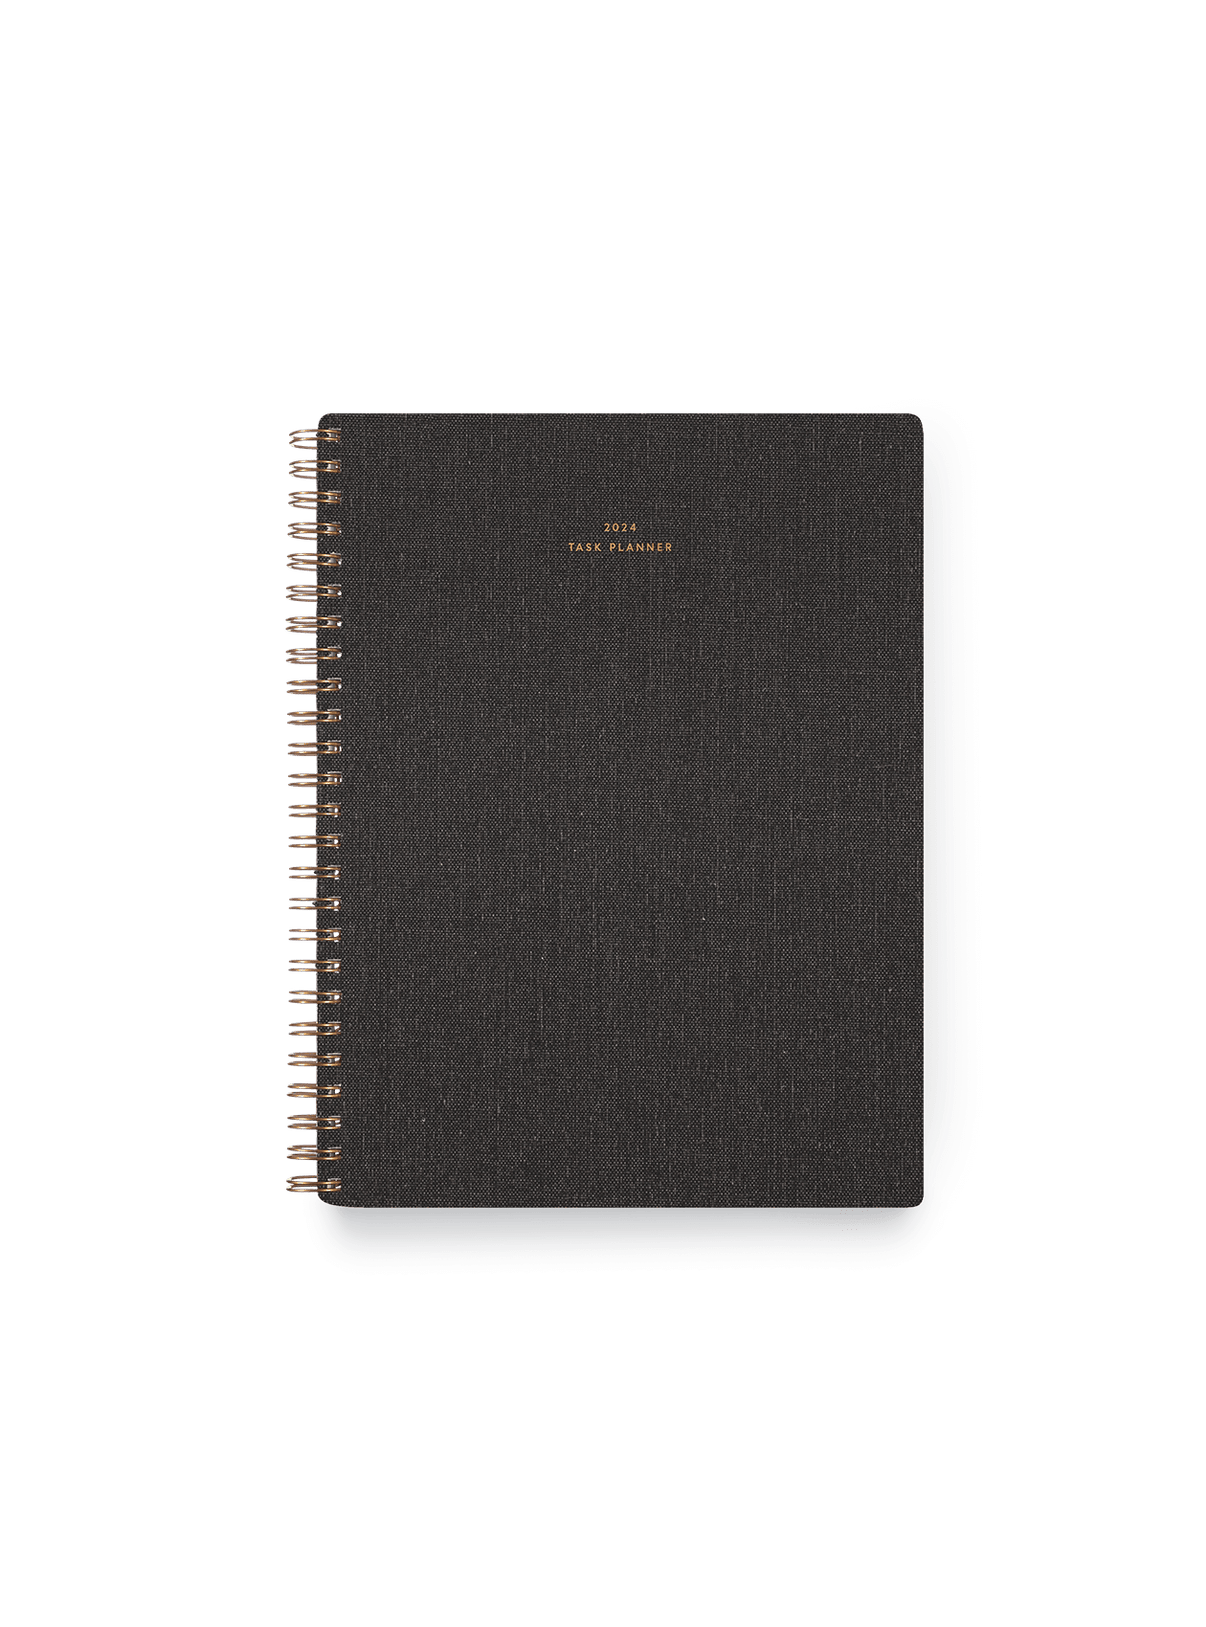 2024 Compact Task Planner in Charcoal Gray bookcloth with brass wire-o binding front view || Charcoal Gray